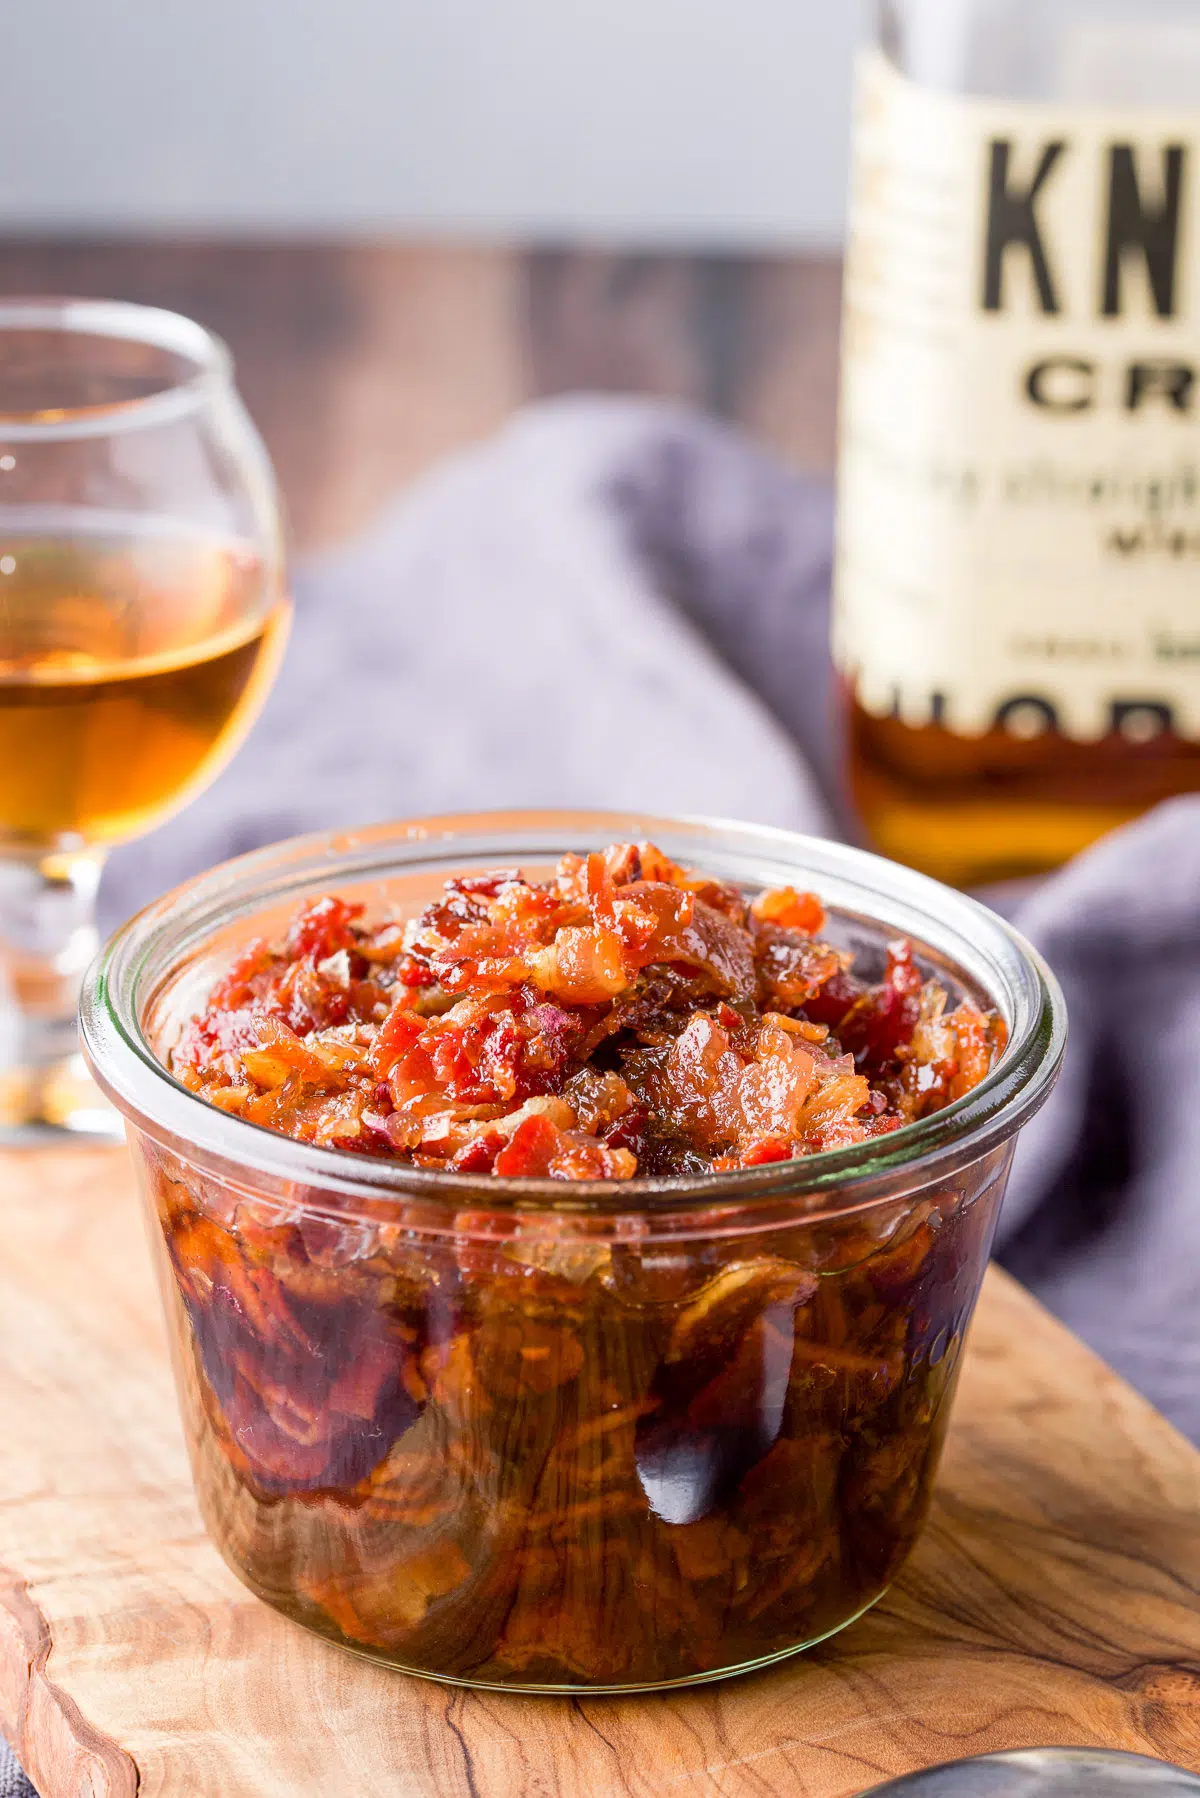 Bourbon in a glass behind the jar of bacon jam